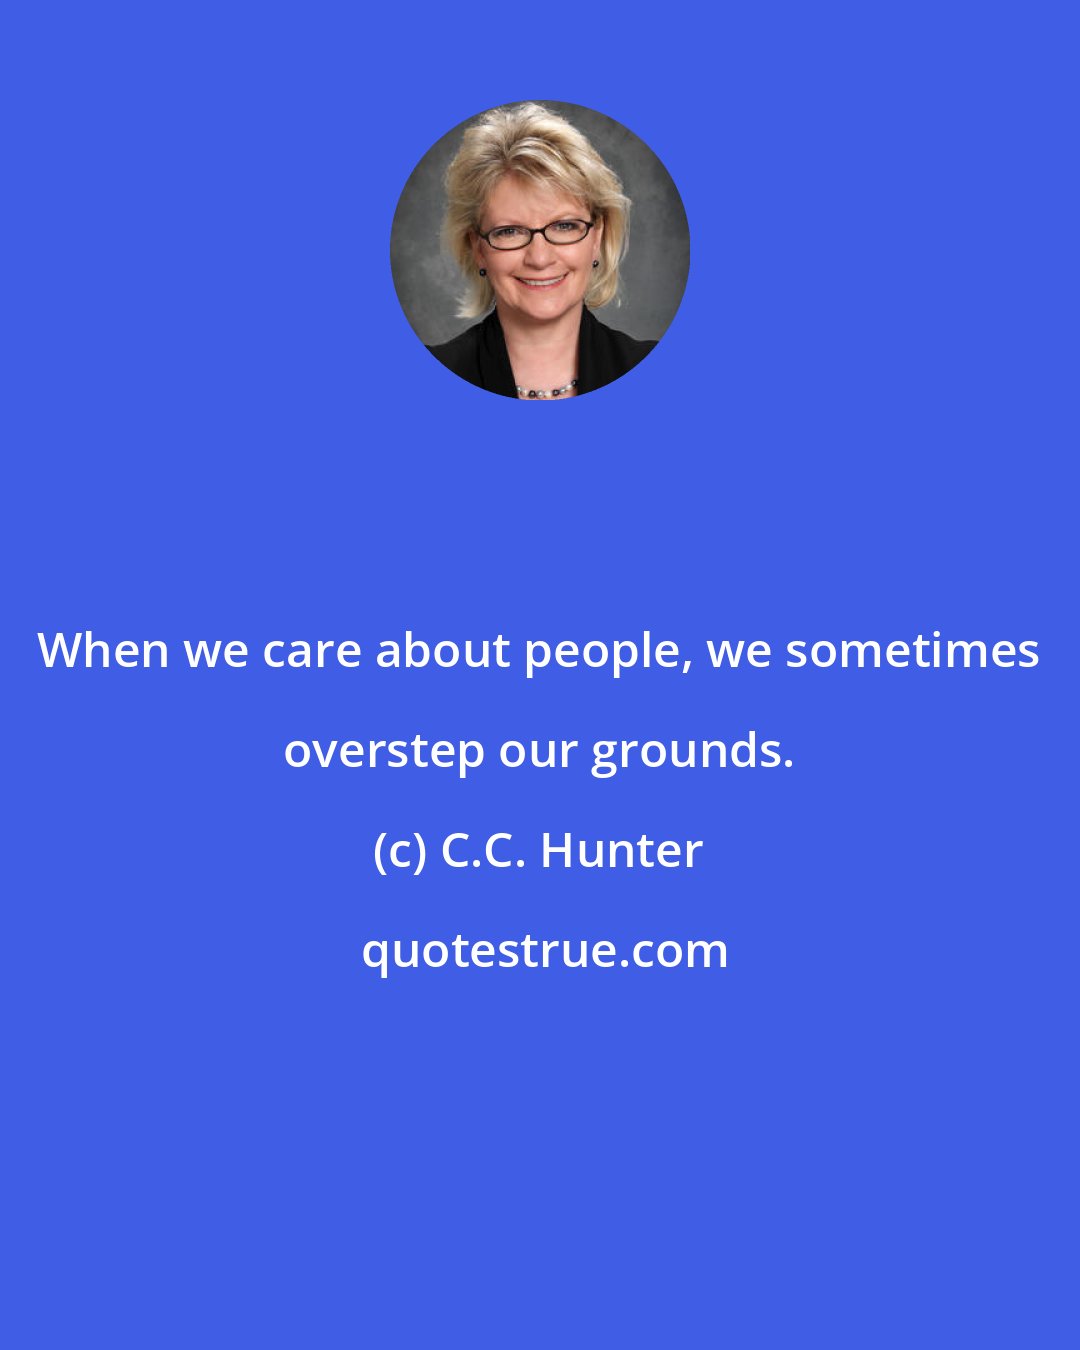 C.C. Hunter: When we care about people, we sometimes overstep our grounds.